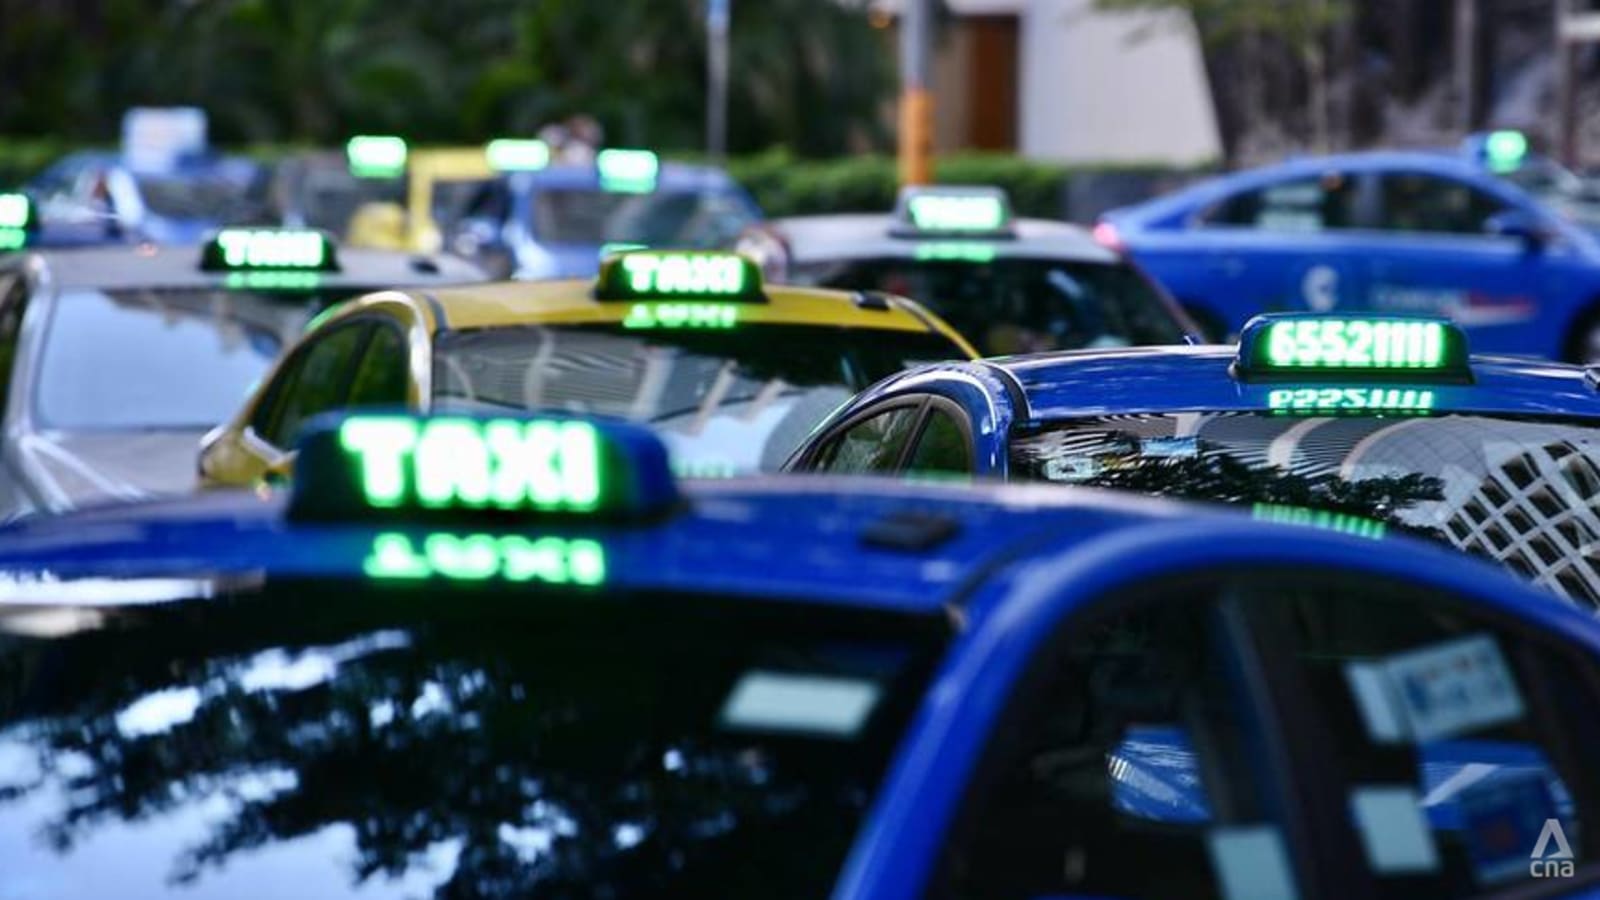 All taxi operators to raise their fares in March